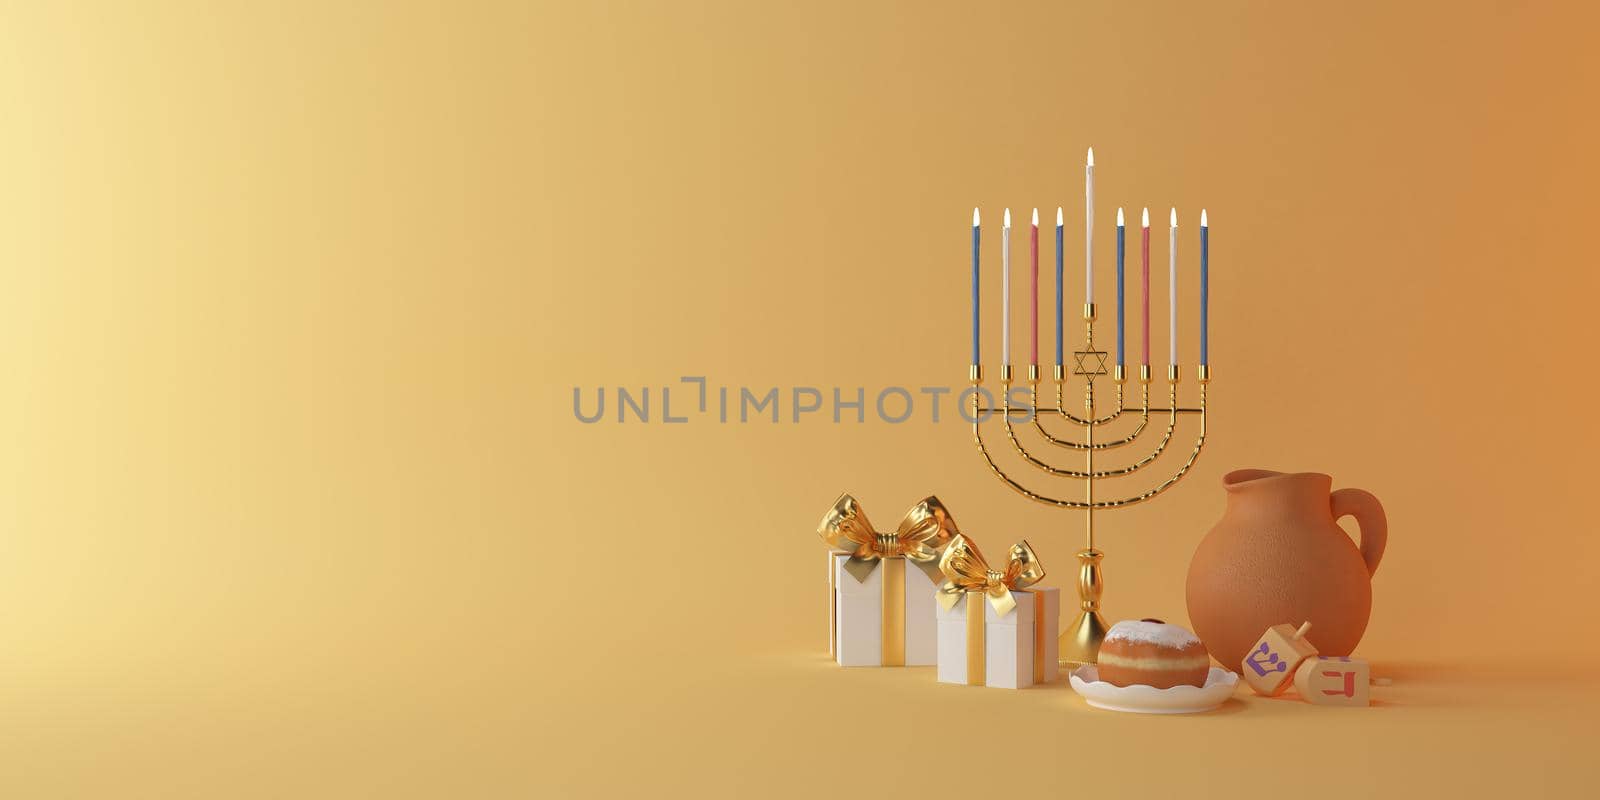 3d rendering Image of Jewish holiday Hanukkah with menorah or traditional Candelabra,gif box, donuts and wooden dreidels orspinning top, doughnut on a yellow background. by put3d